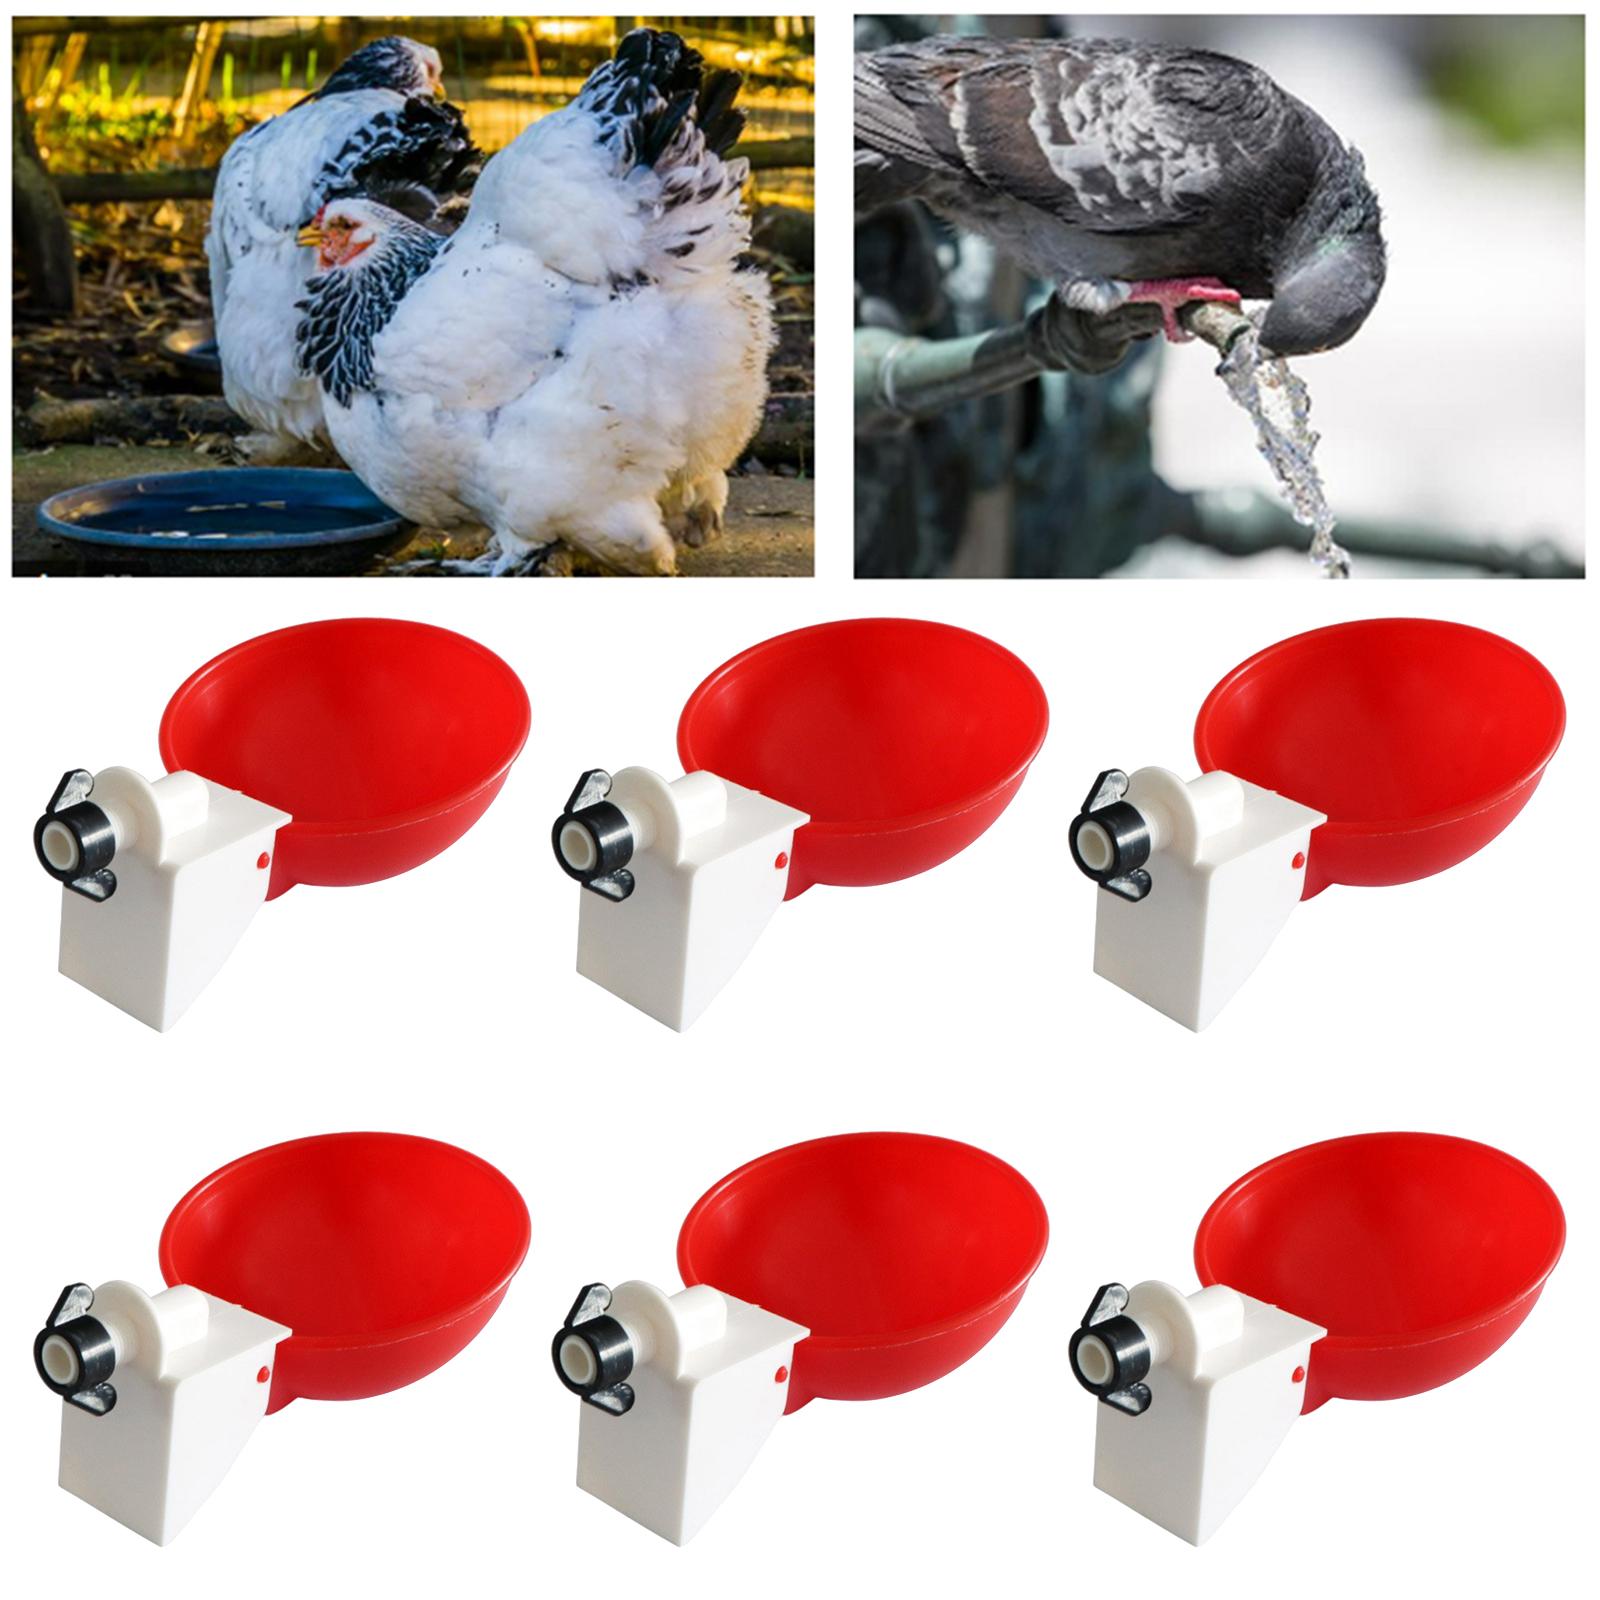 6 Pieces Chicken Drinkers Water Bowl Plastic Drinking Bowls for Quail Chicks Red